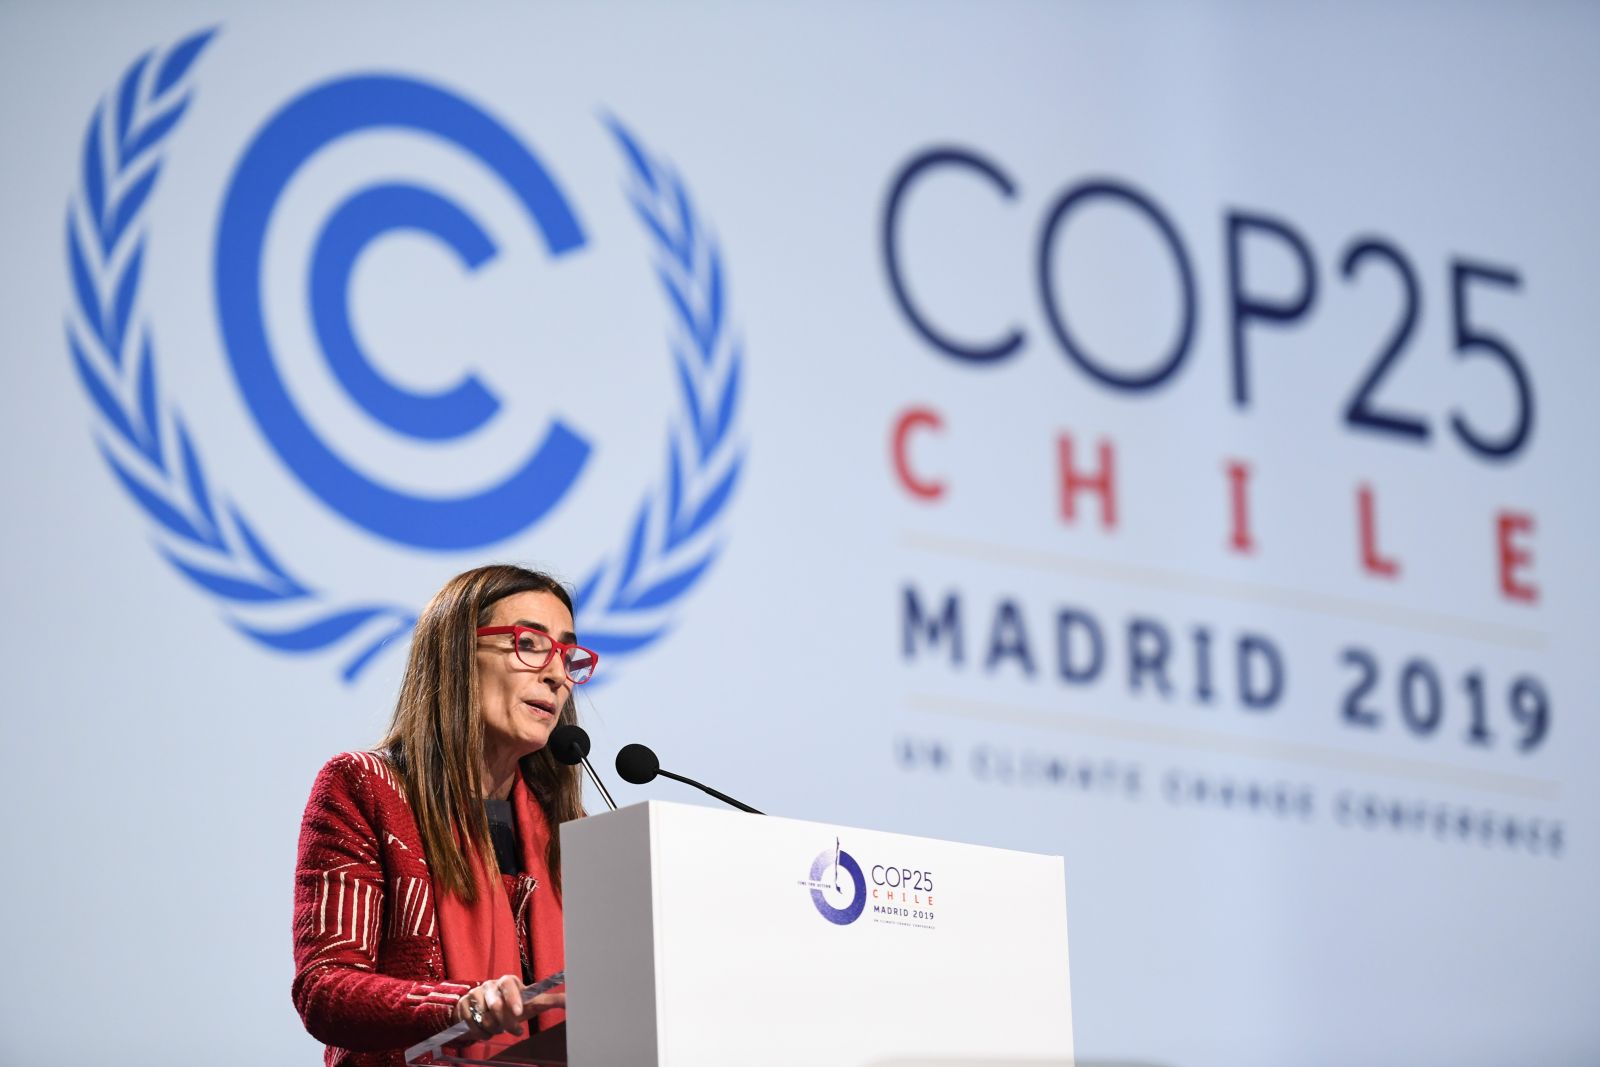 Carolina Schmidt, chairwoman of the COP25 and the environment minister of Chile, speaking at the closing plenary of the conference in Madrid.